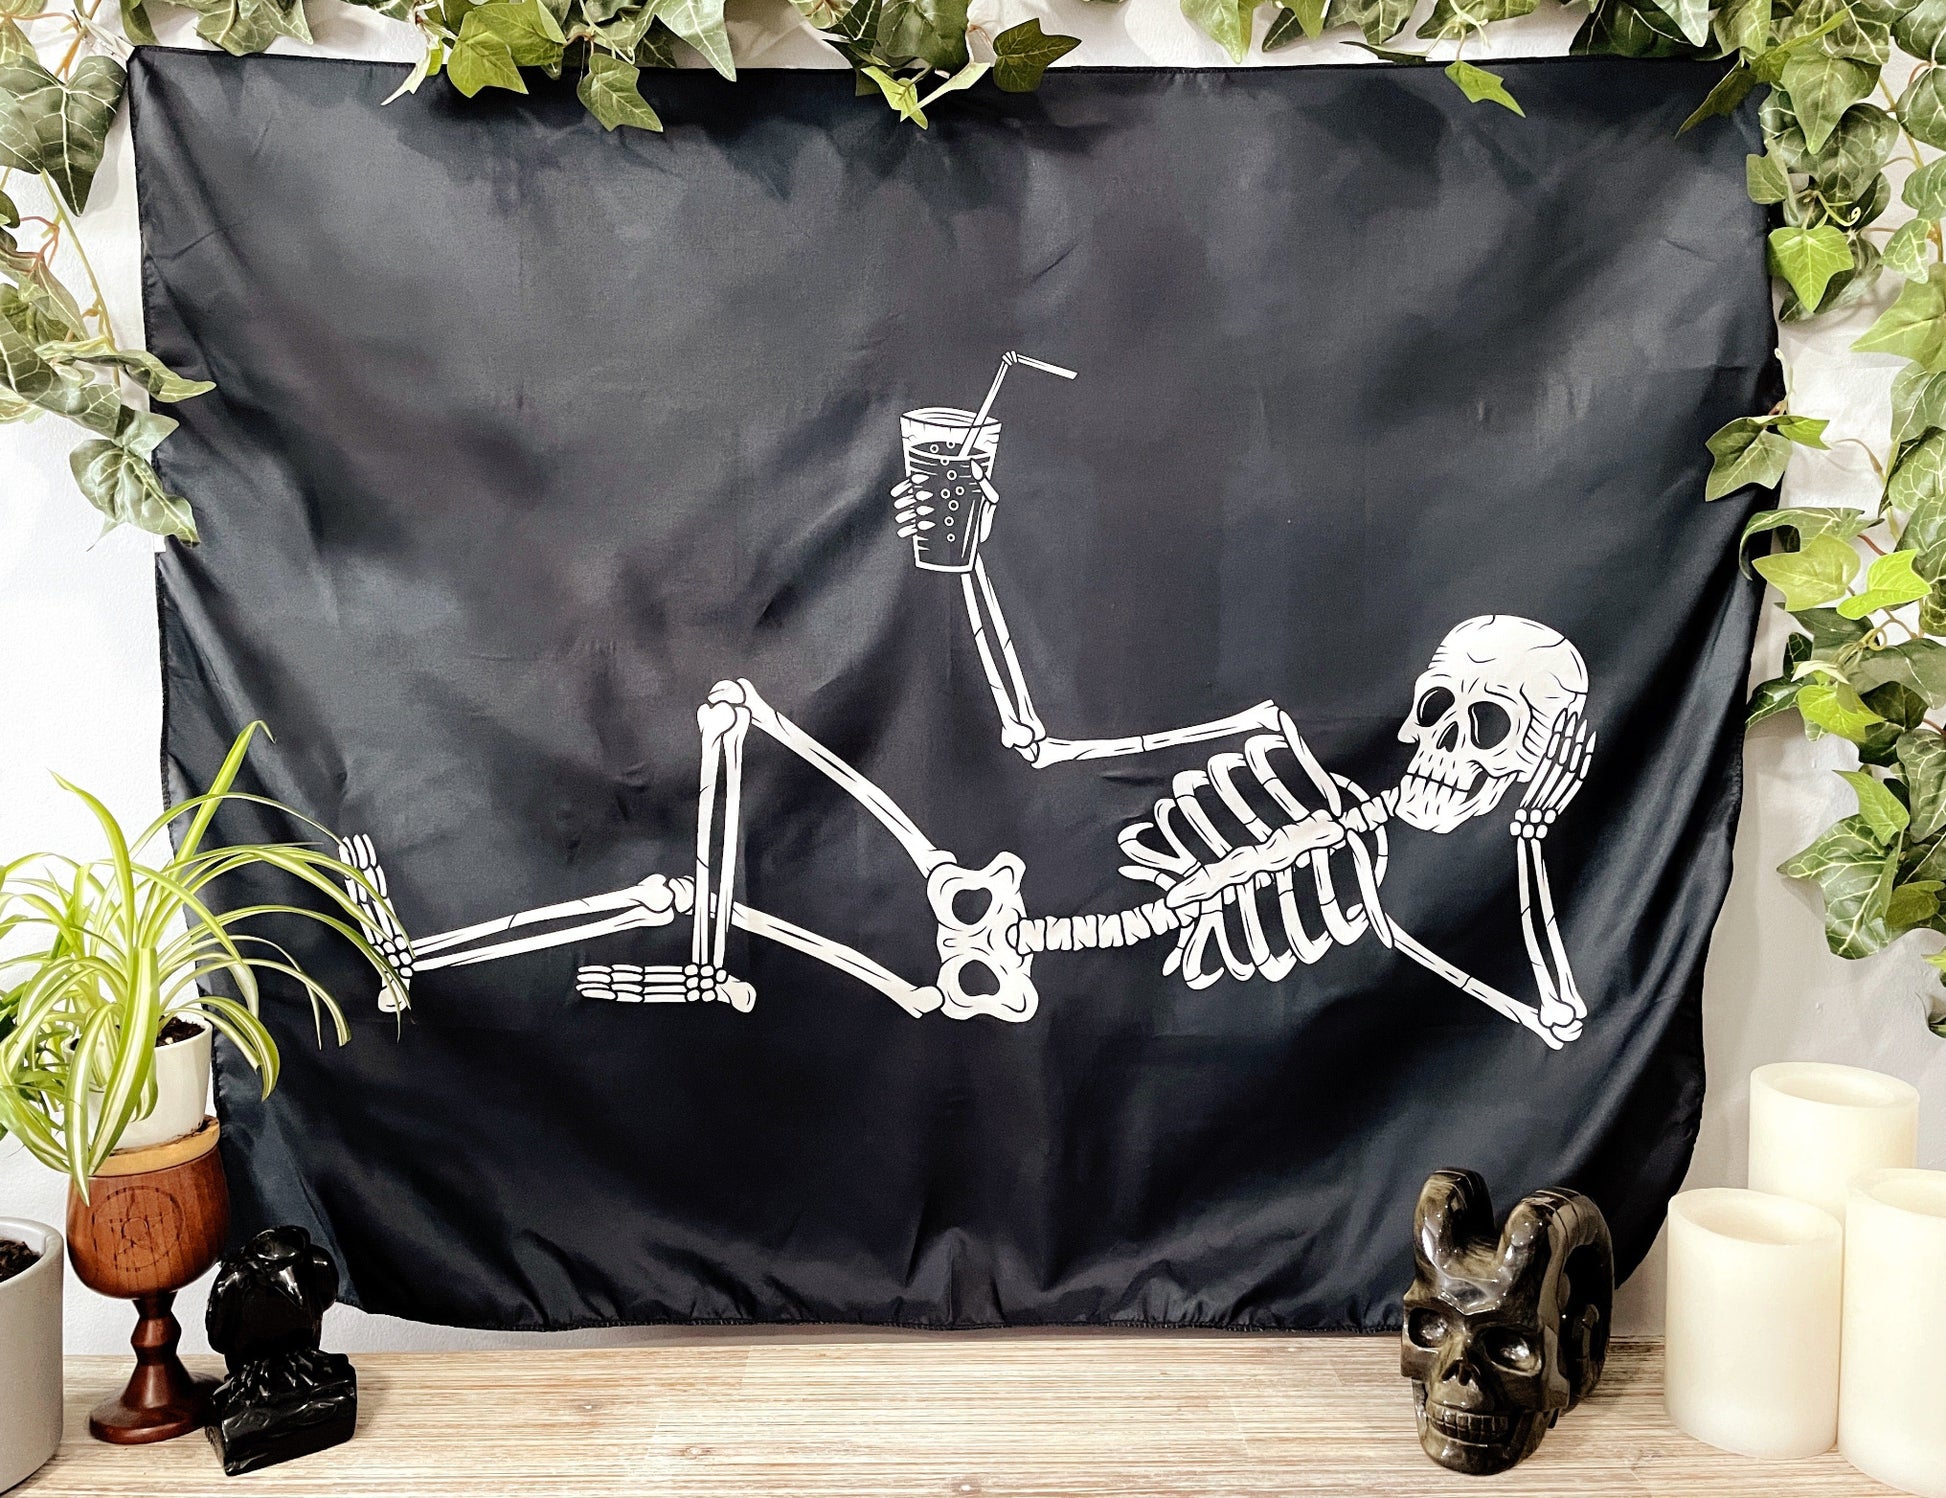 Pictured is a large wall tapestry with a black background and a large skeleton lounging with a drink in its hand printed in white on it.